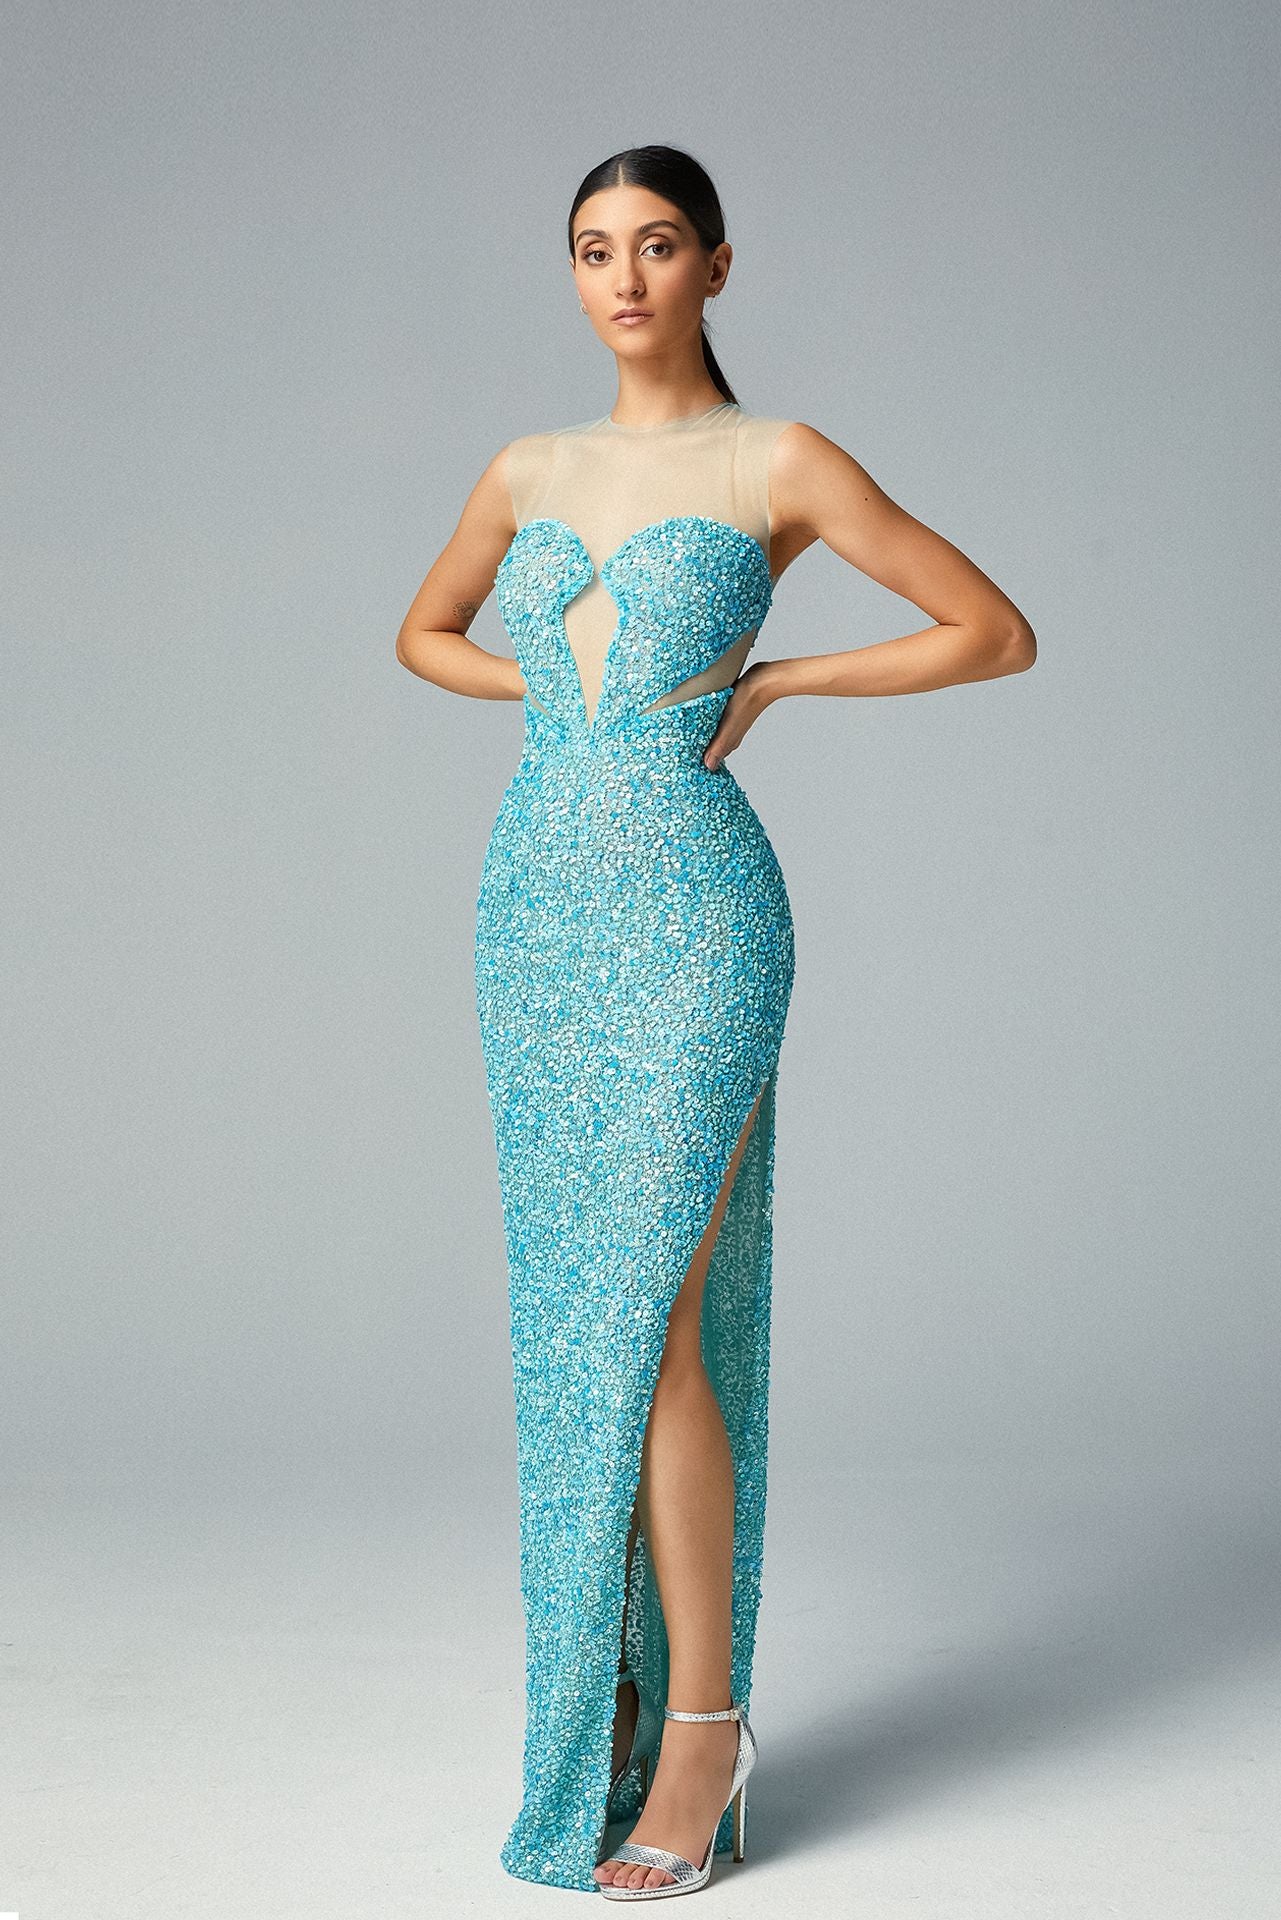 Load image into Gallery viewer, Off-shoulder Aqua Blue Evening Dress Sequined from Top to Tip-toe Sui Generis Design Neckline
